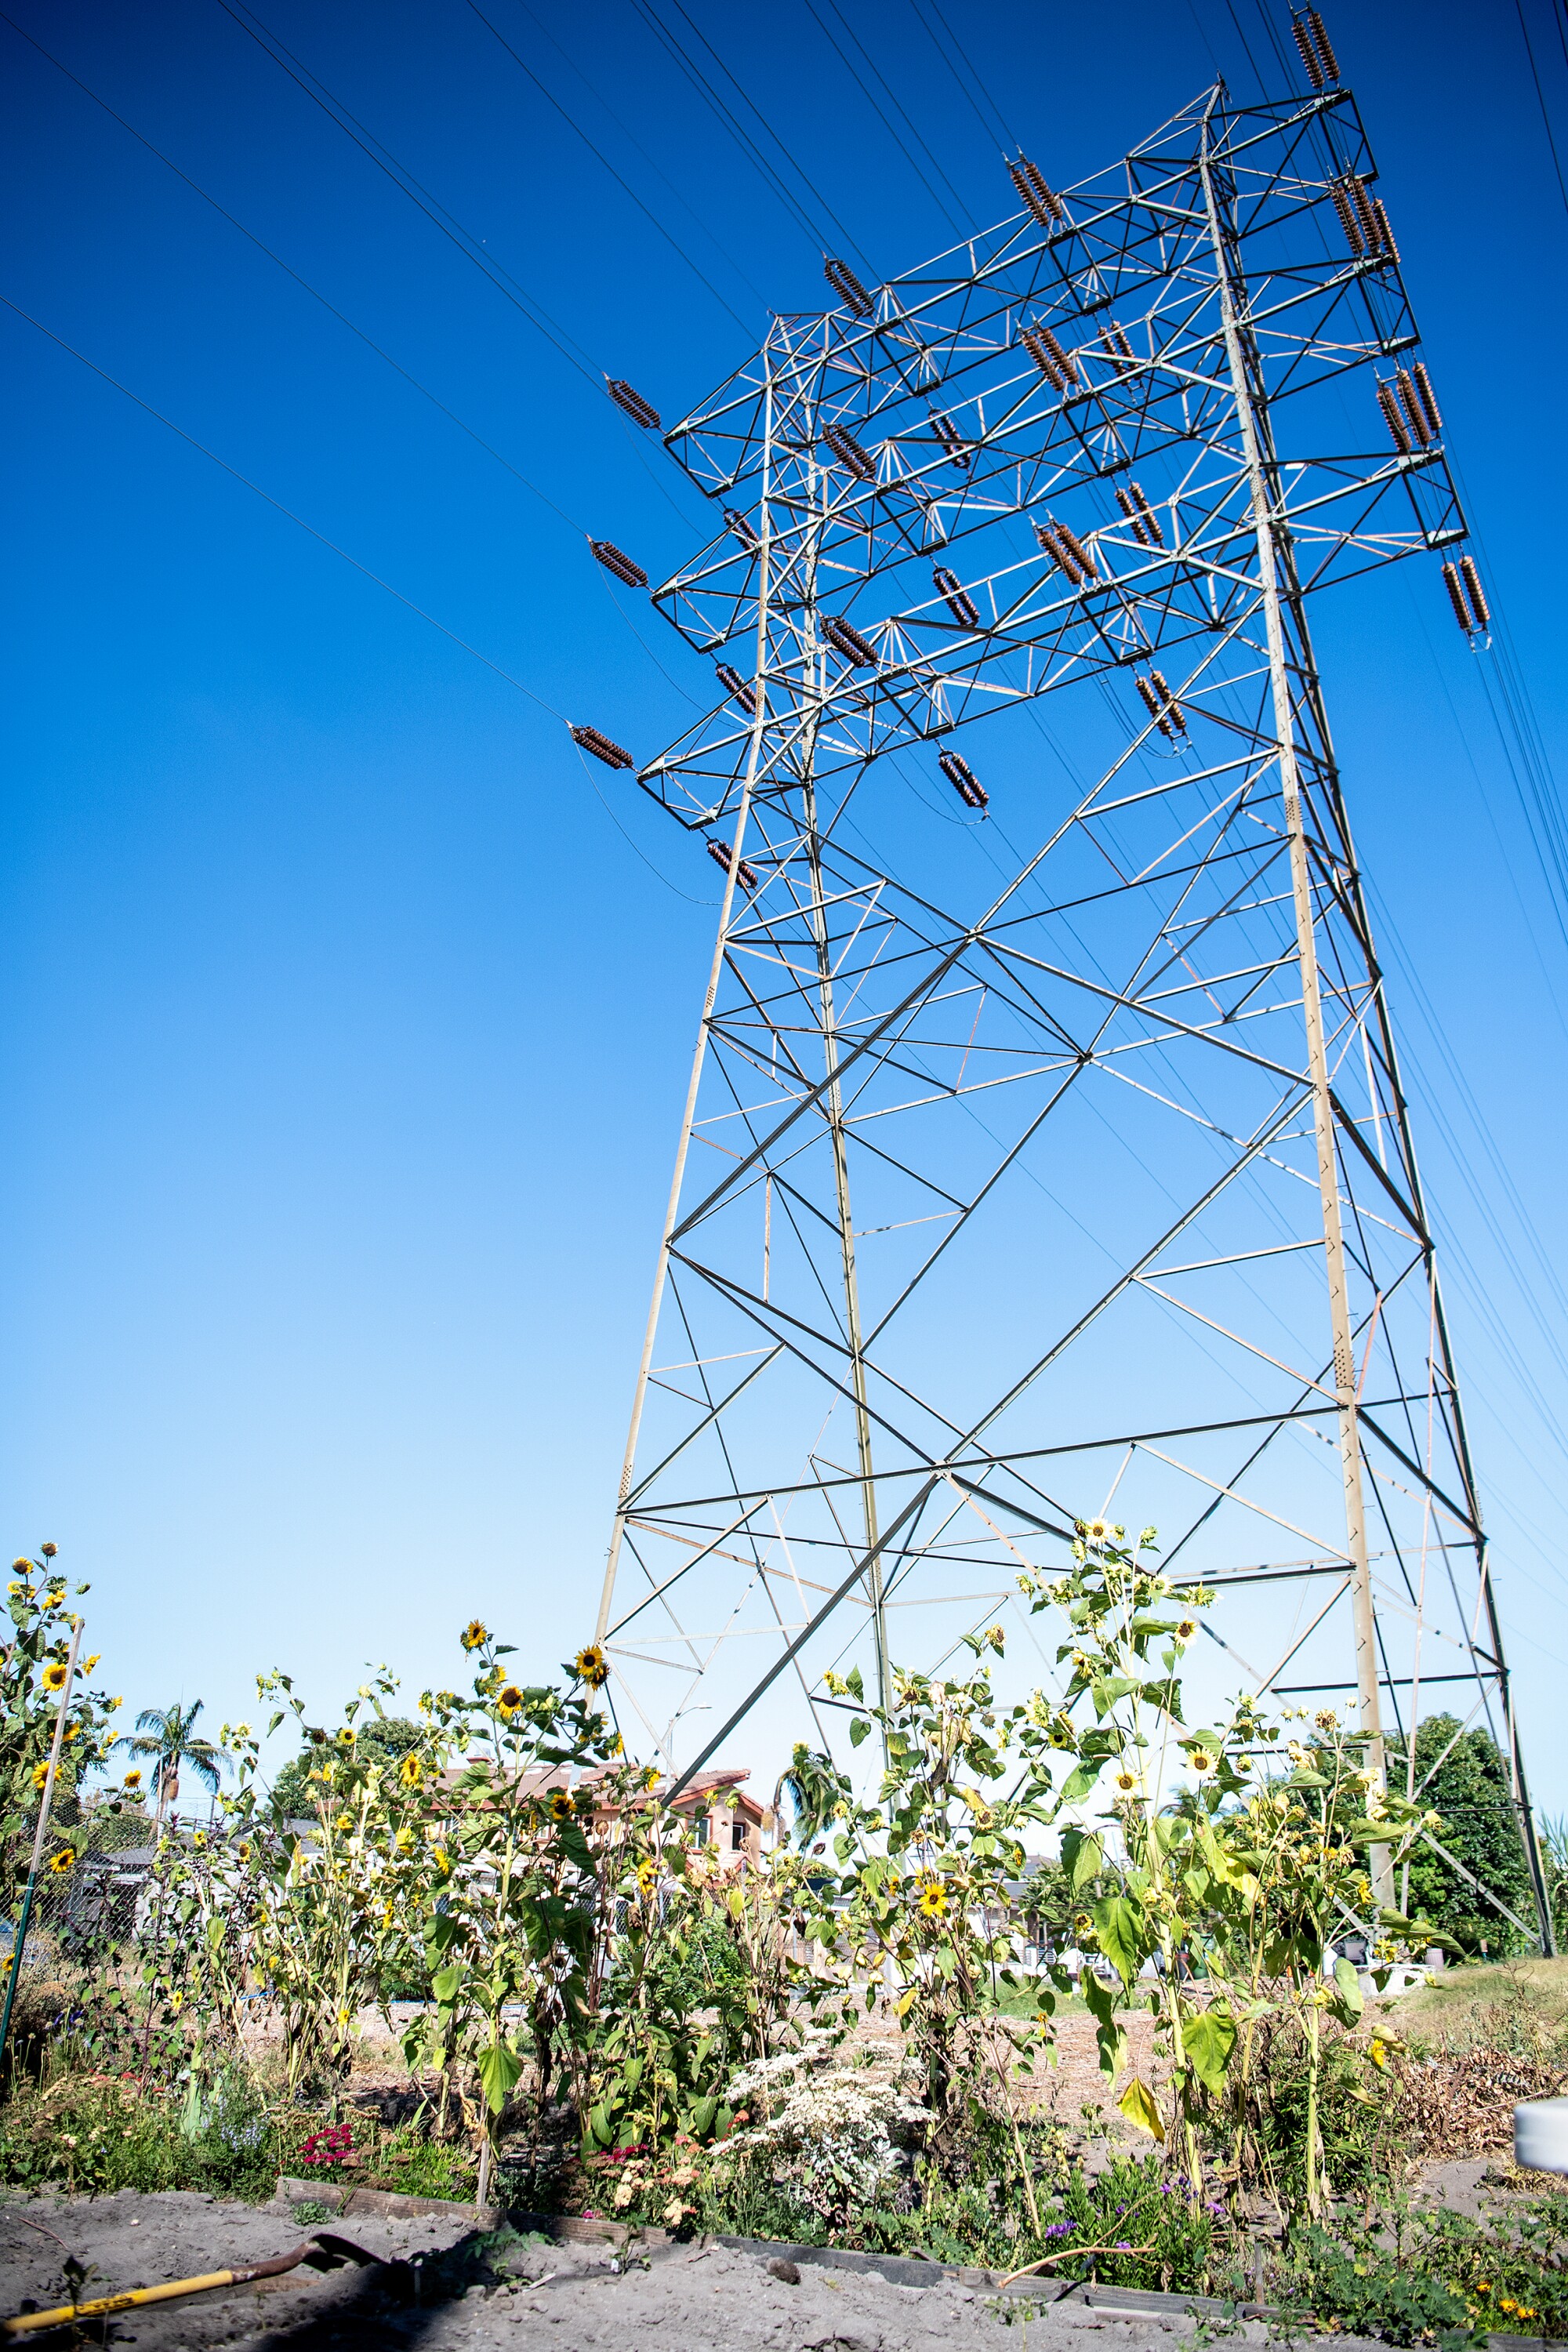 At the base of a tall electric tower is a garden.